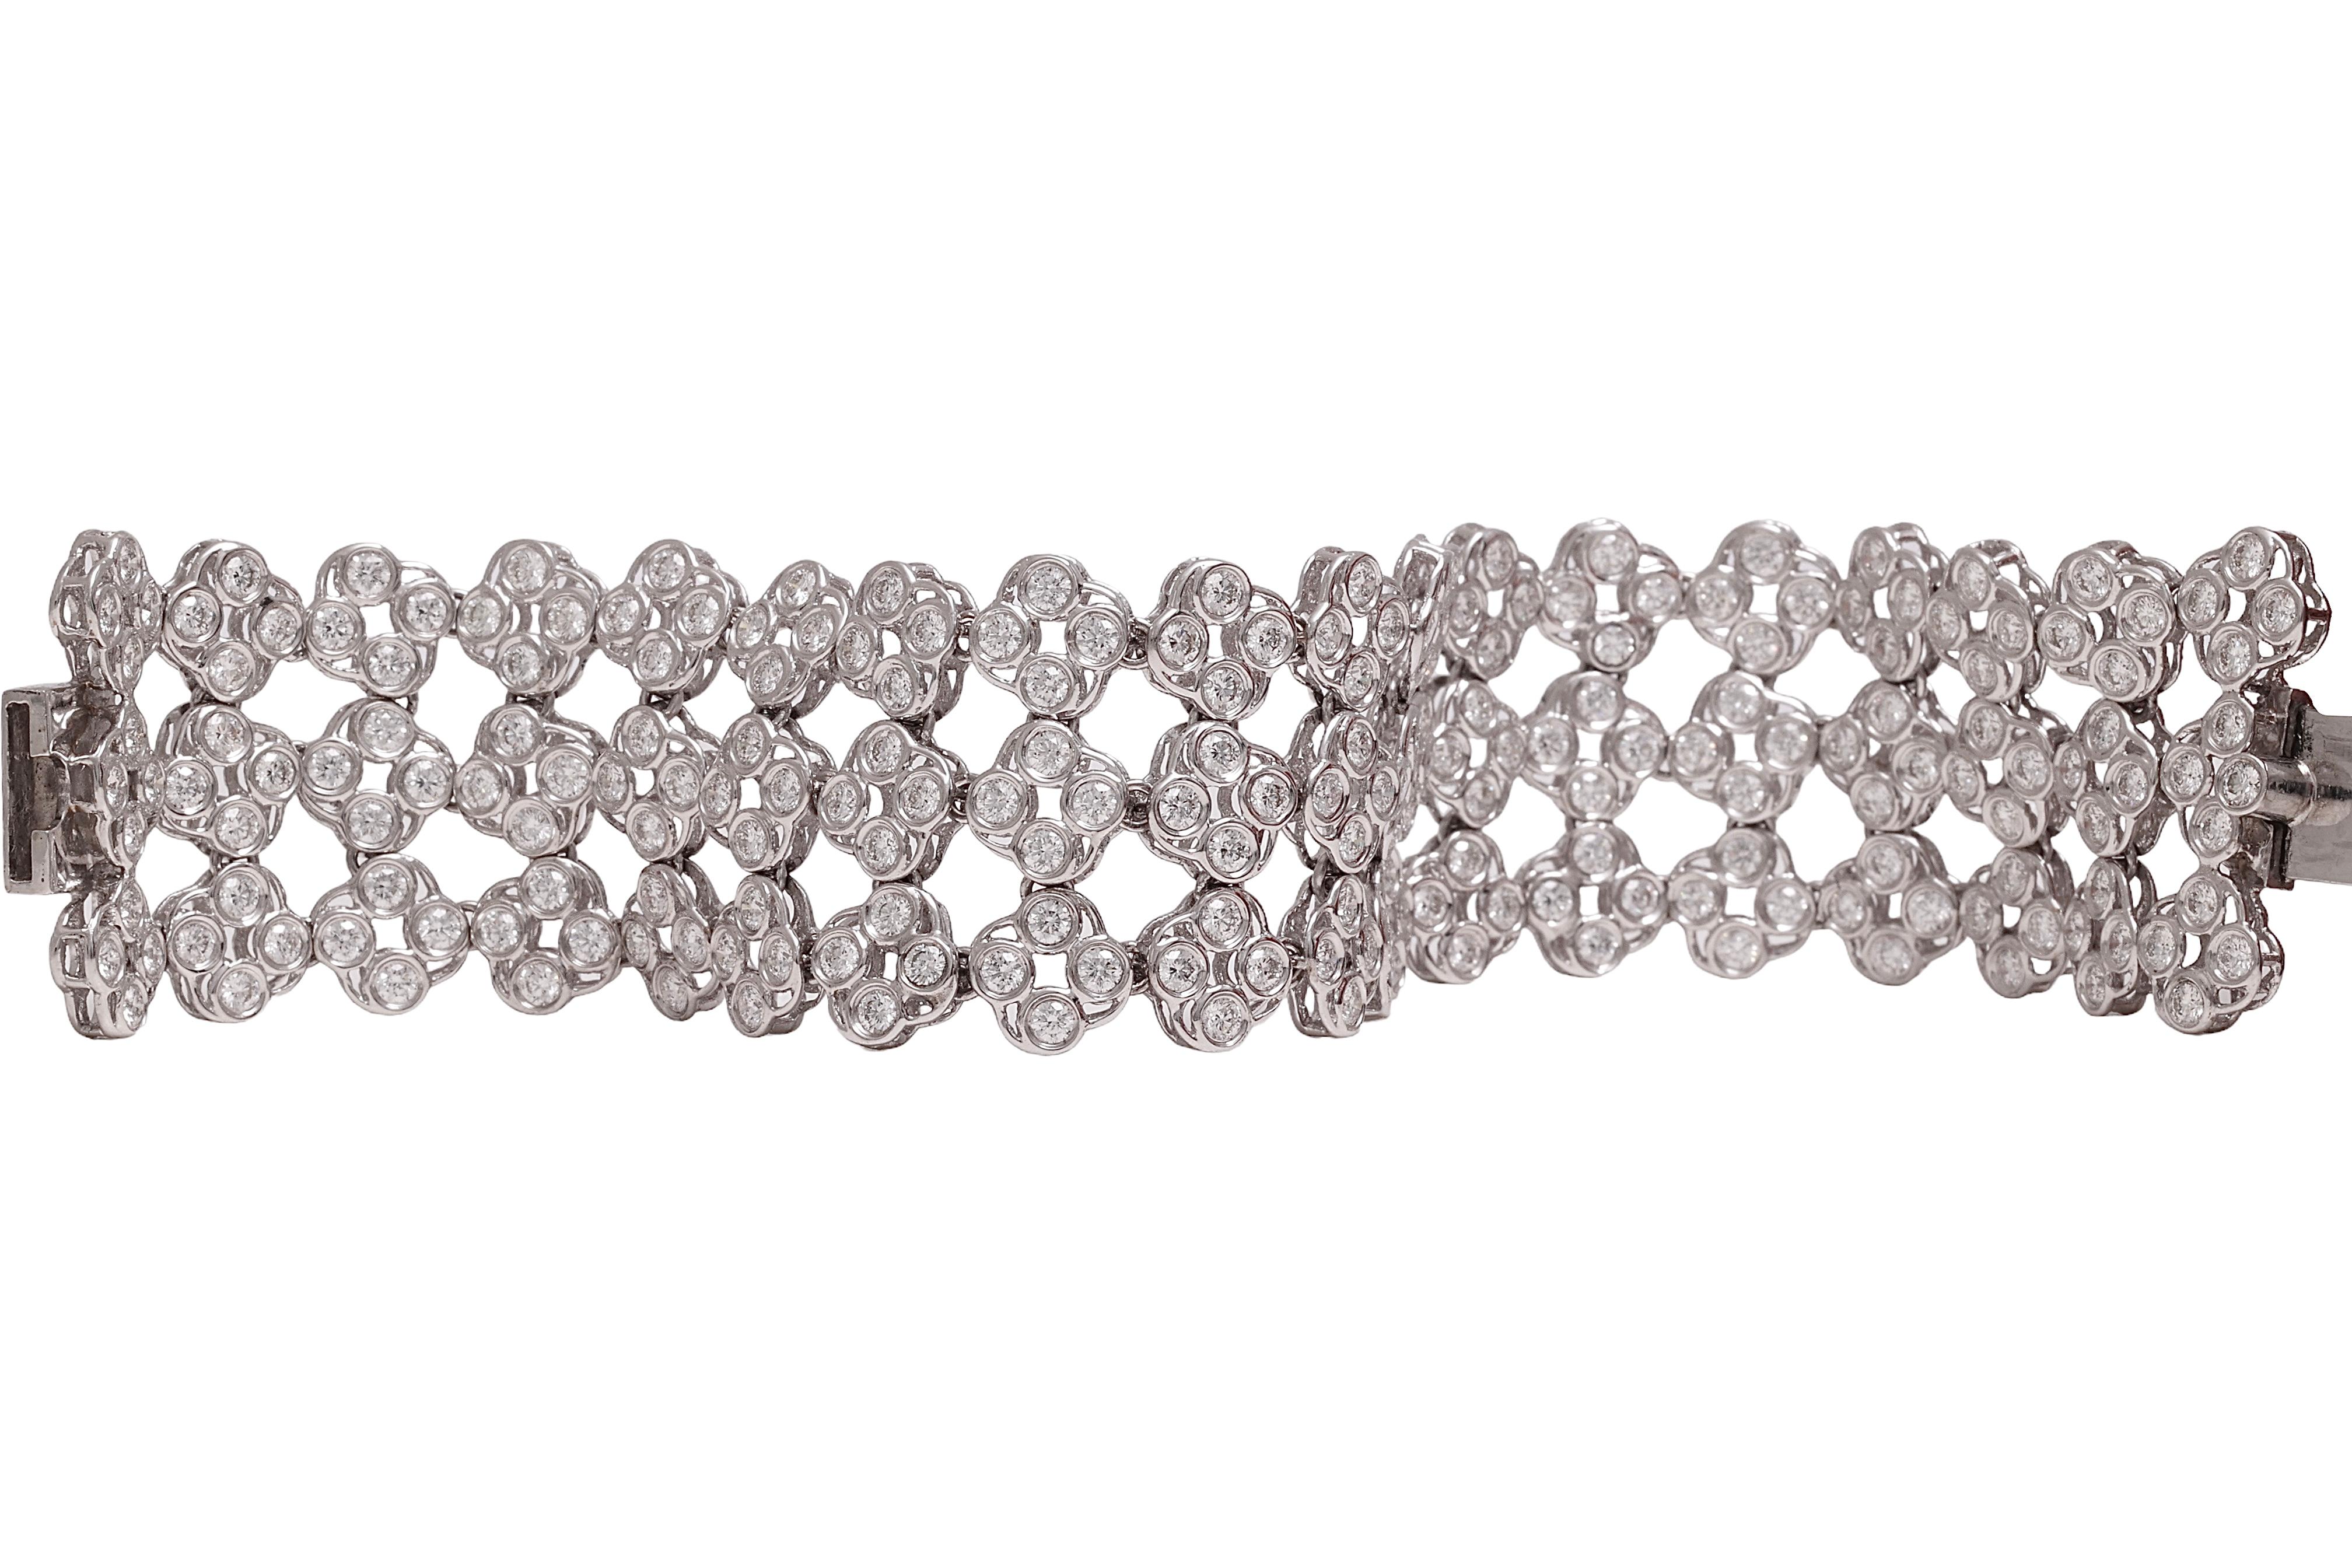 18 kt. White Gold 3 Row Tennis Bracelet With 10.57 ct. Round Cut Diamonds For Sale 5